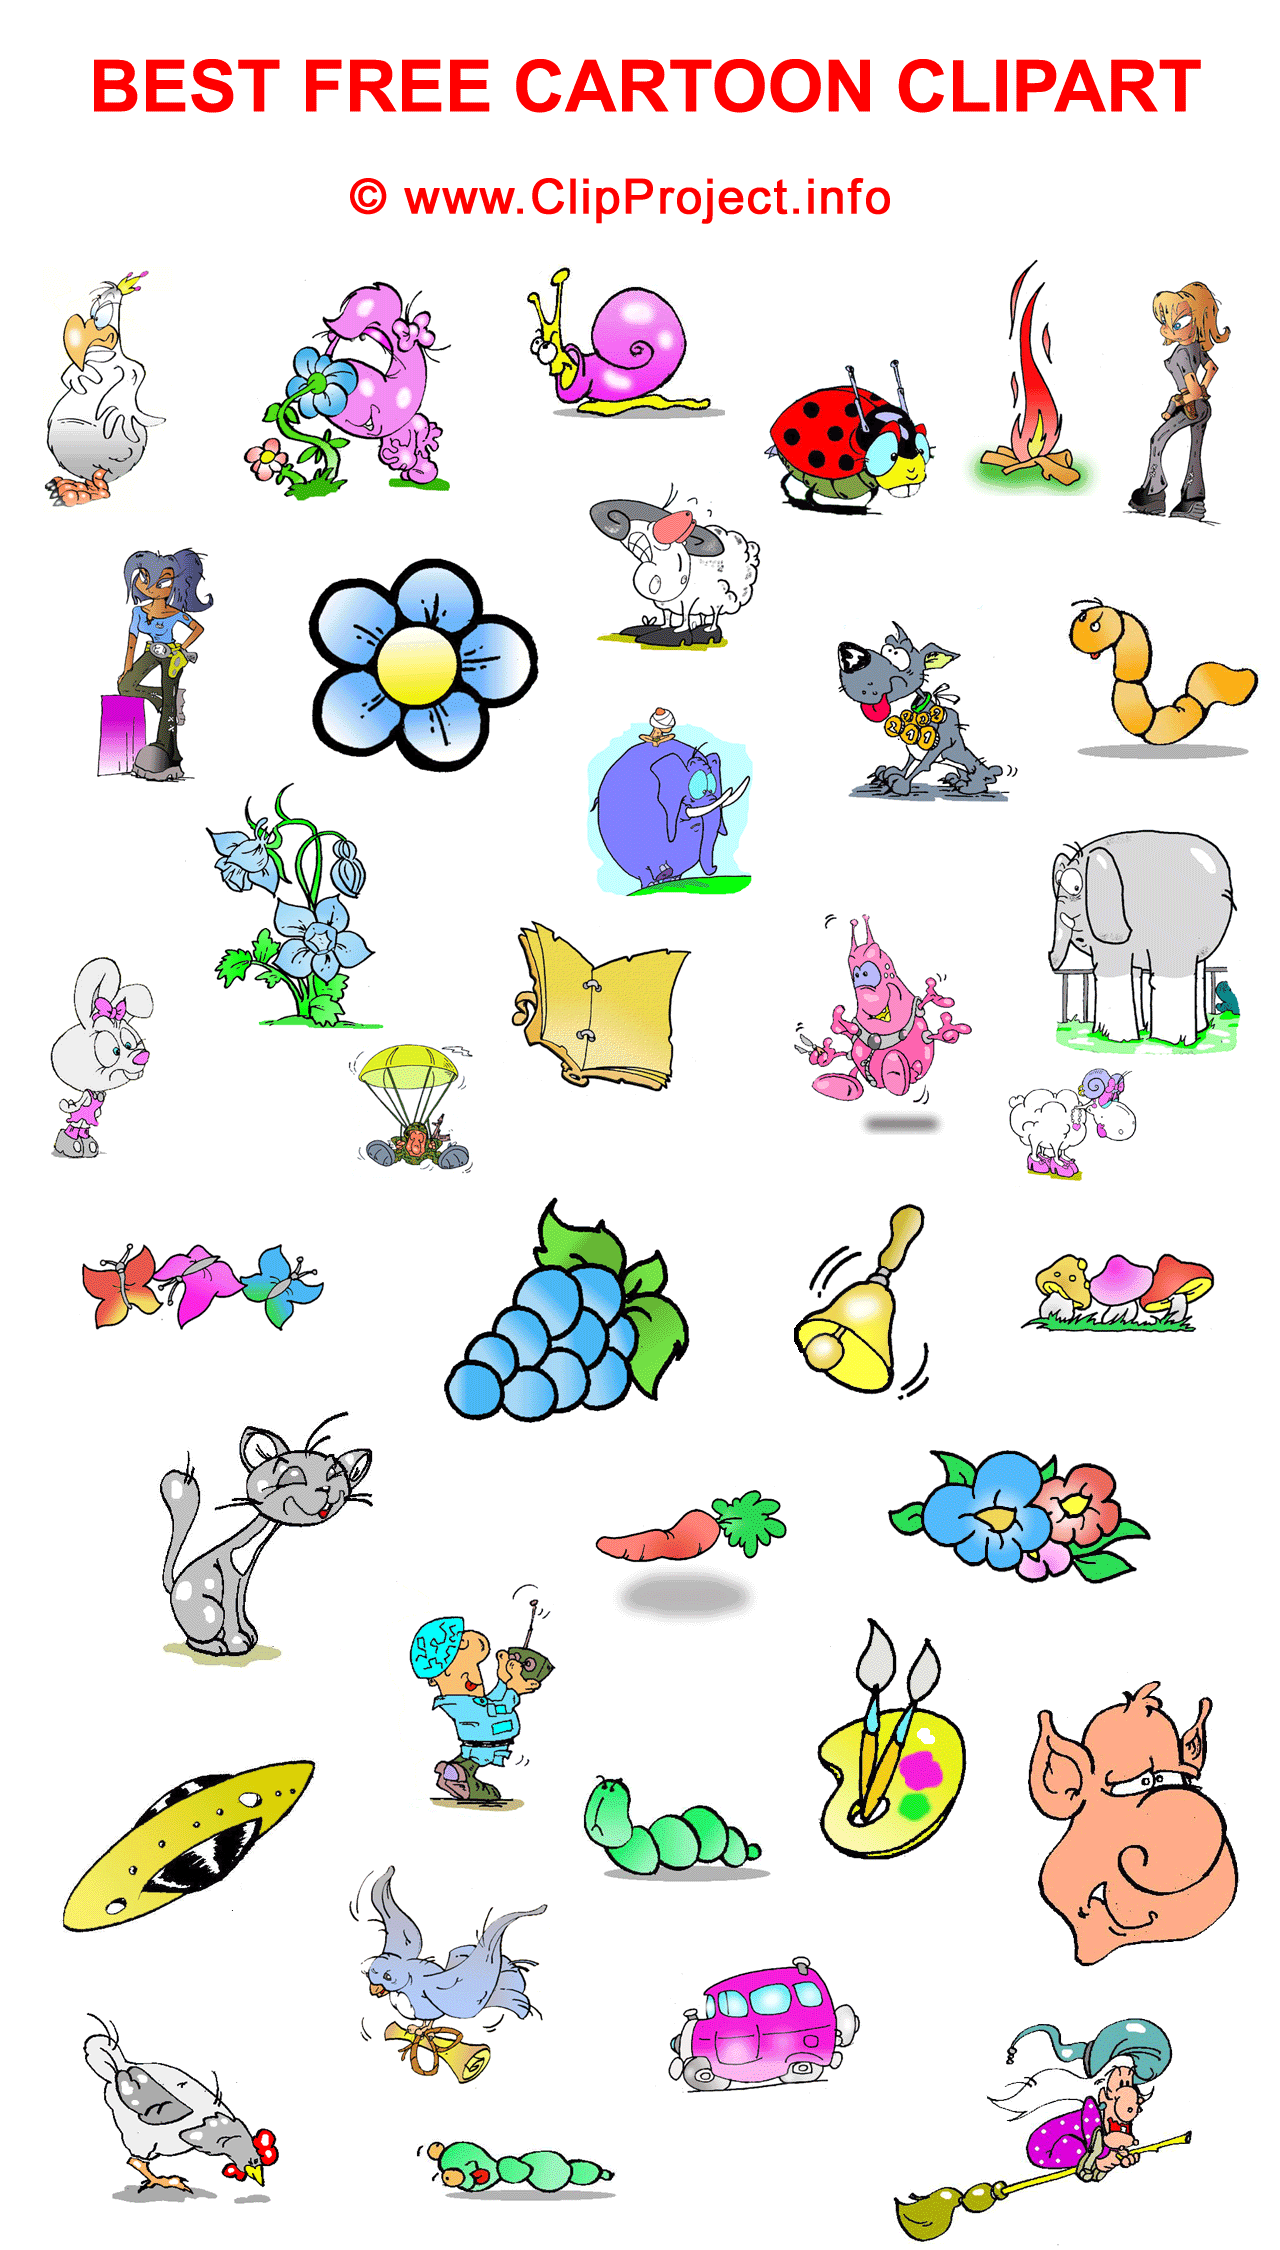 Cartoon Clipart Free The Best Collection Of Cartoon Clipart Download